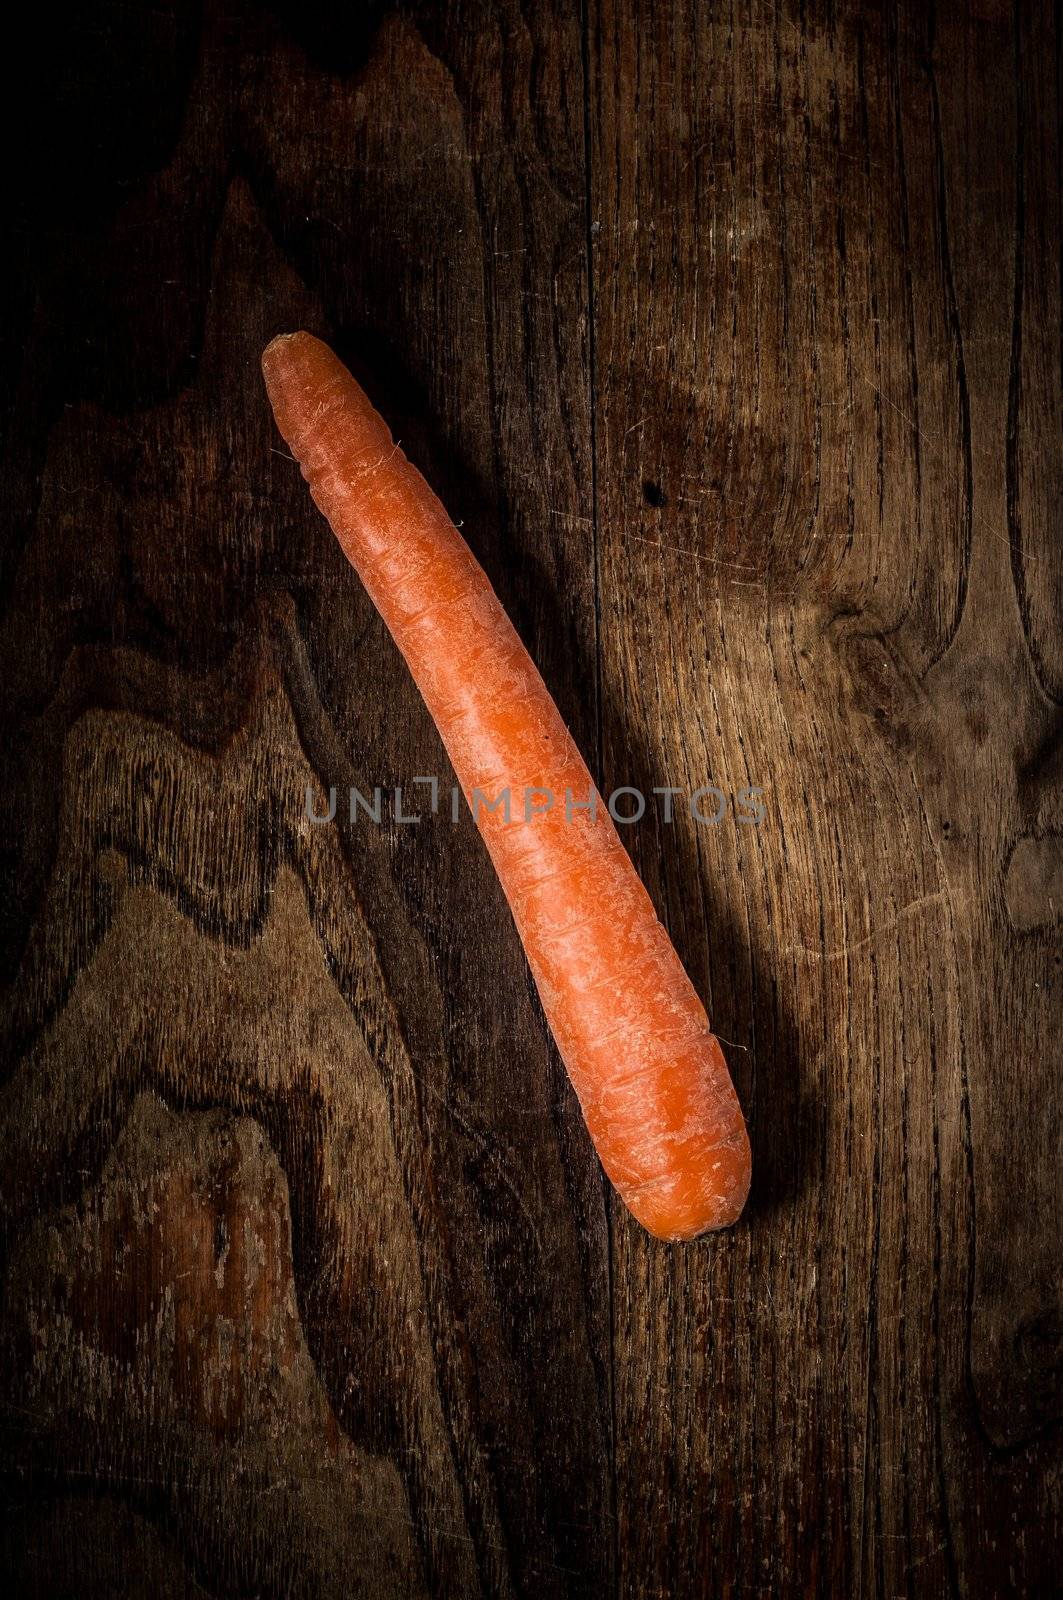 carrot on wood by peus